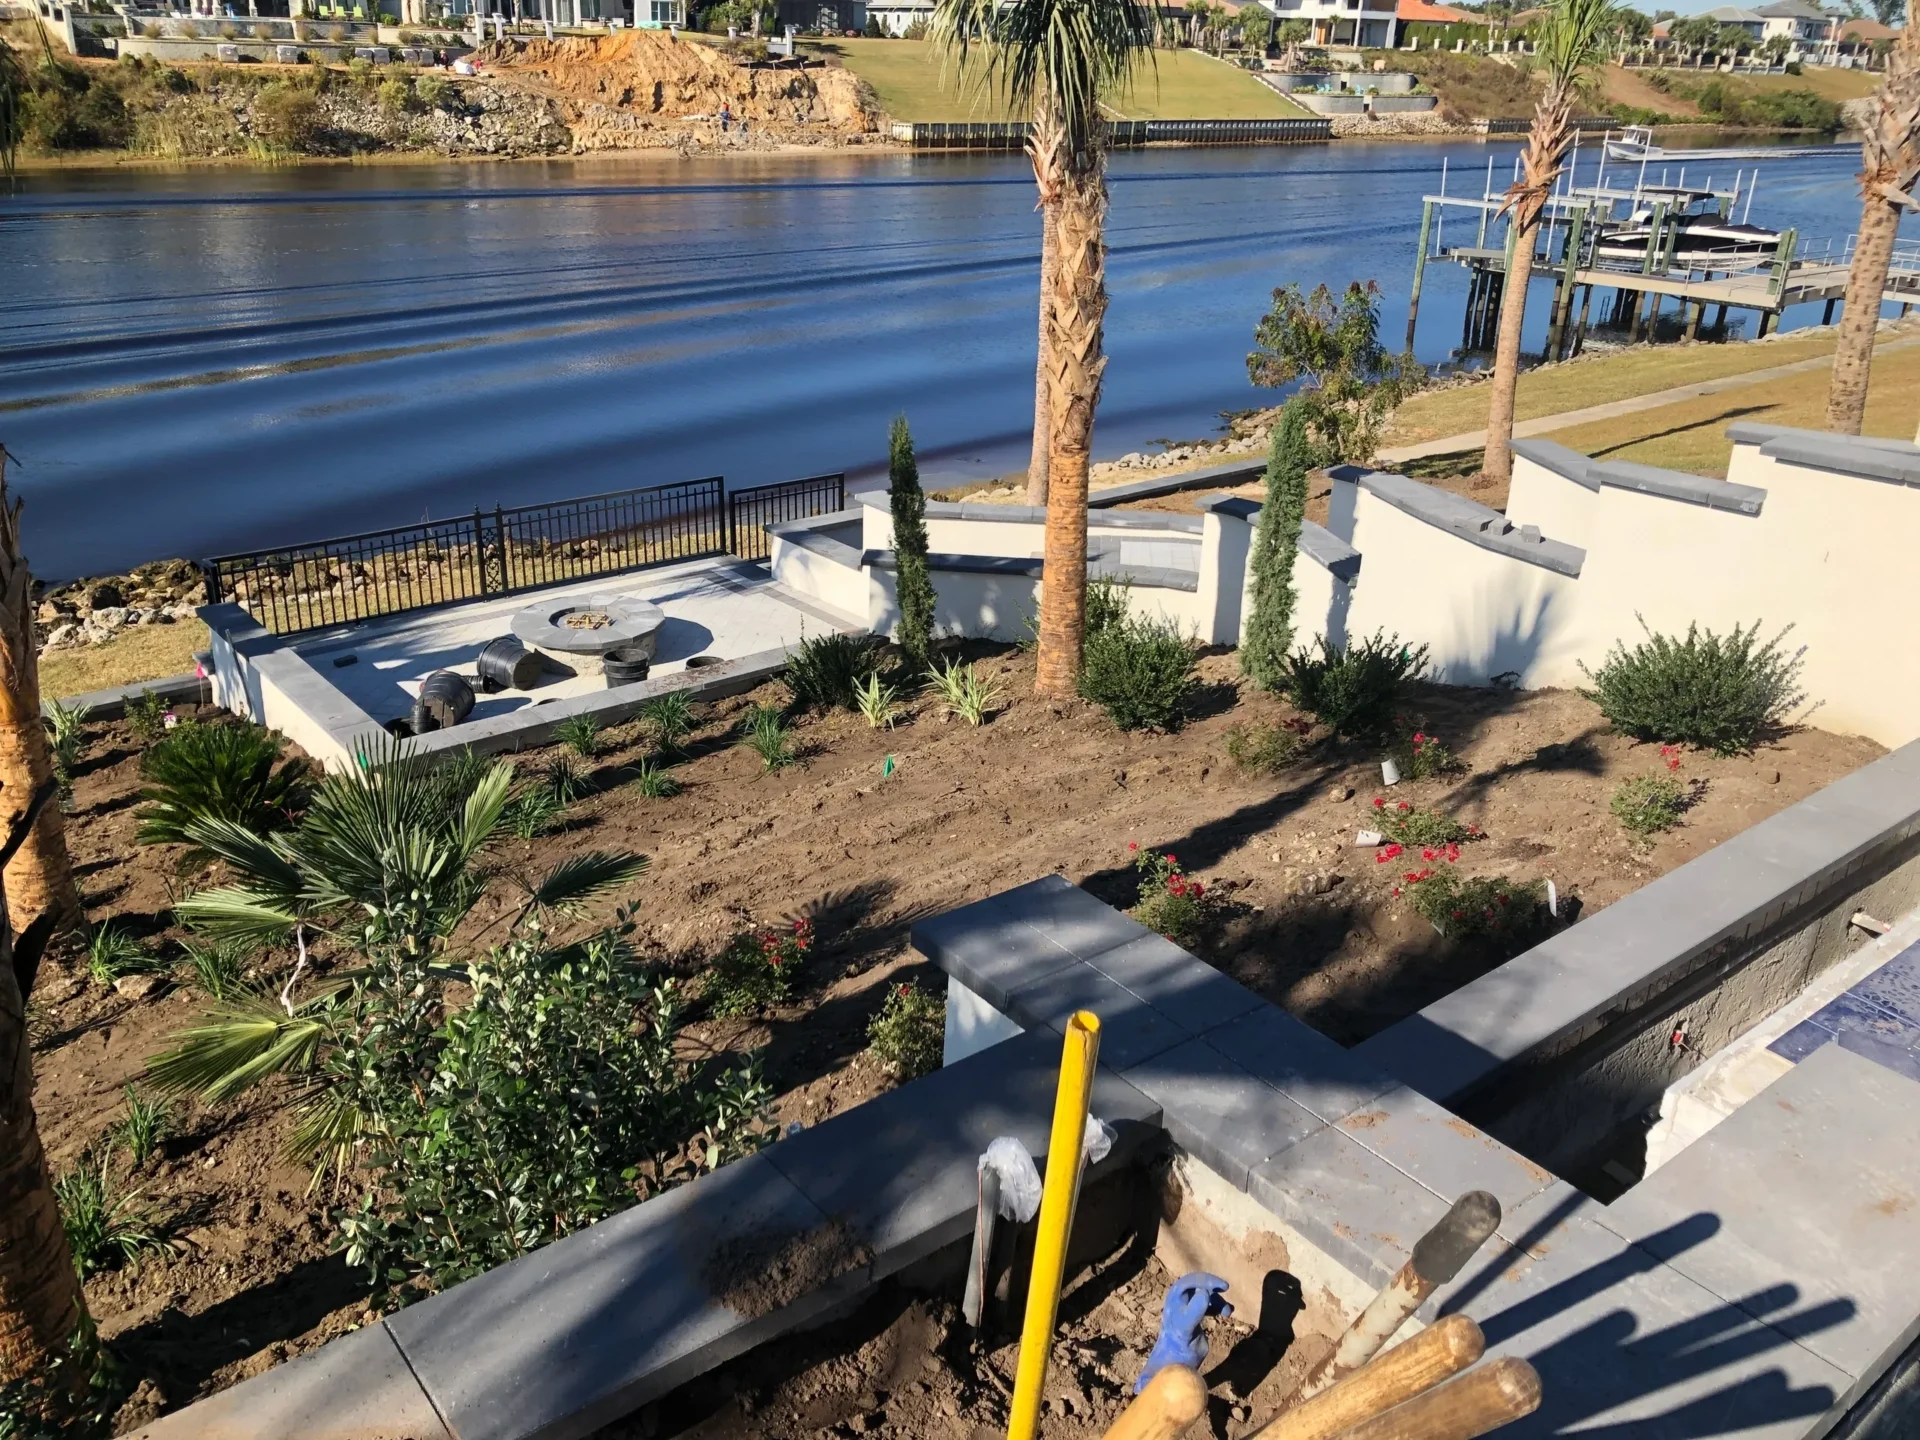 A view of the water from above shows a boat dock, palm trees and a walkway.